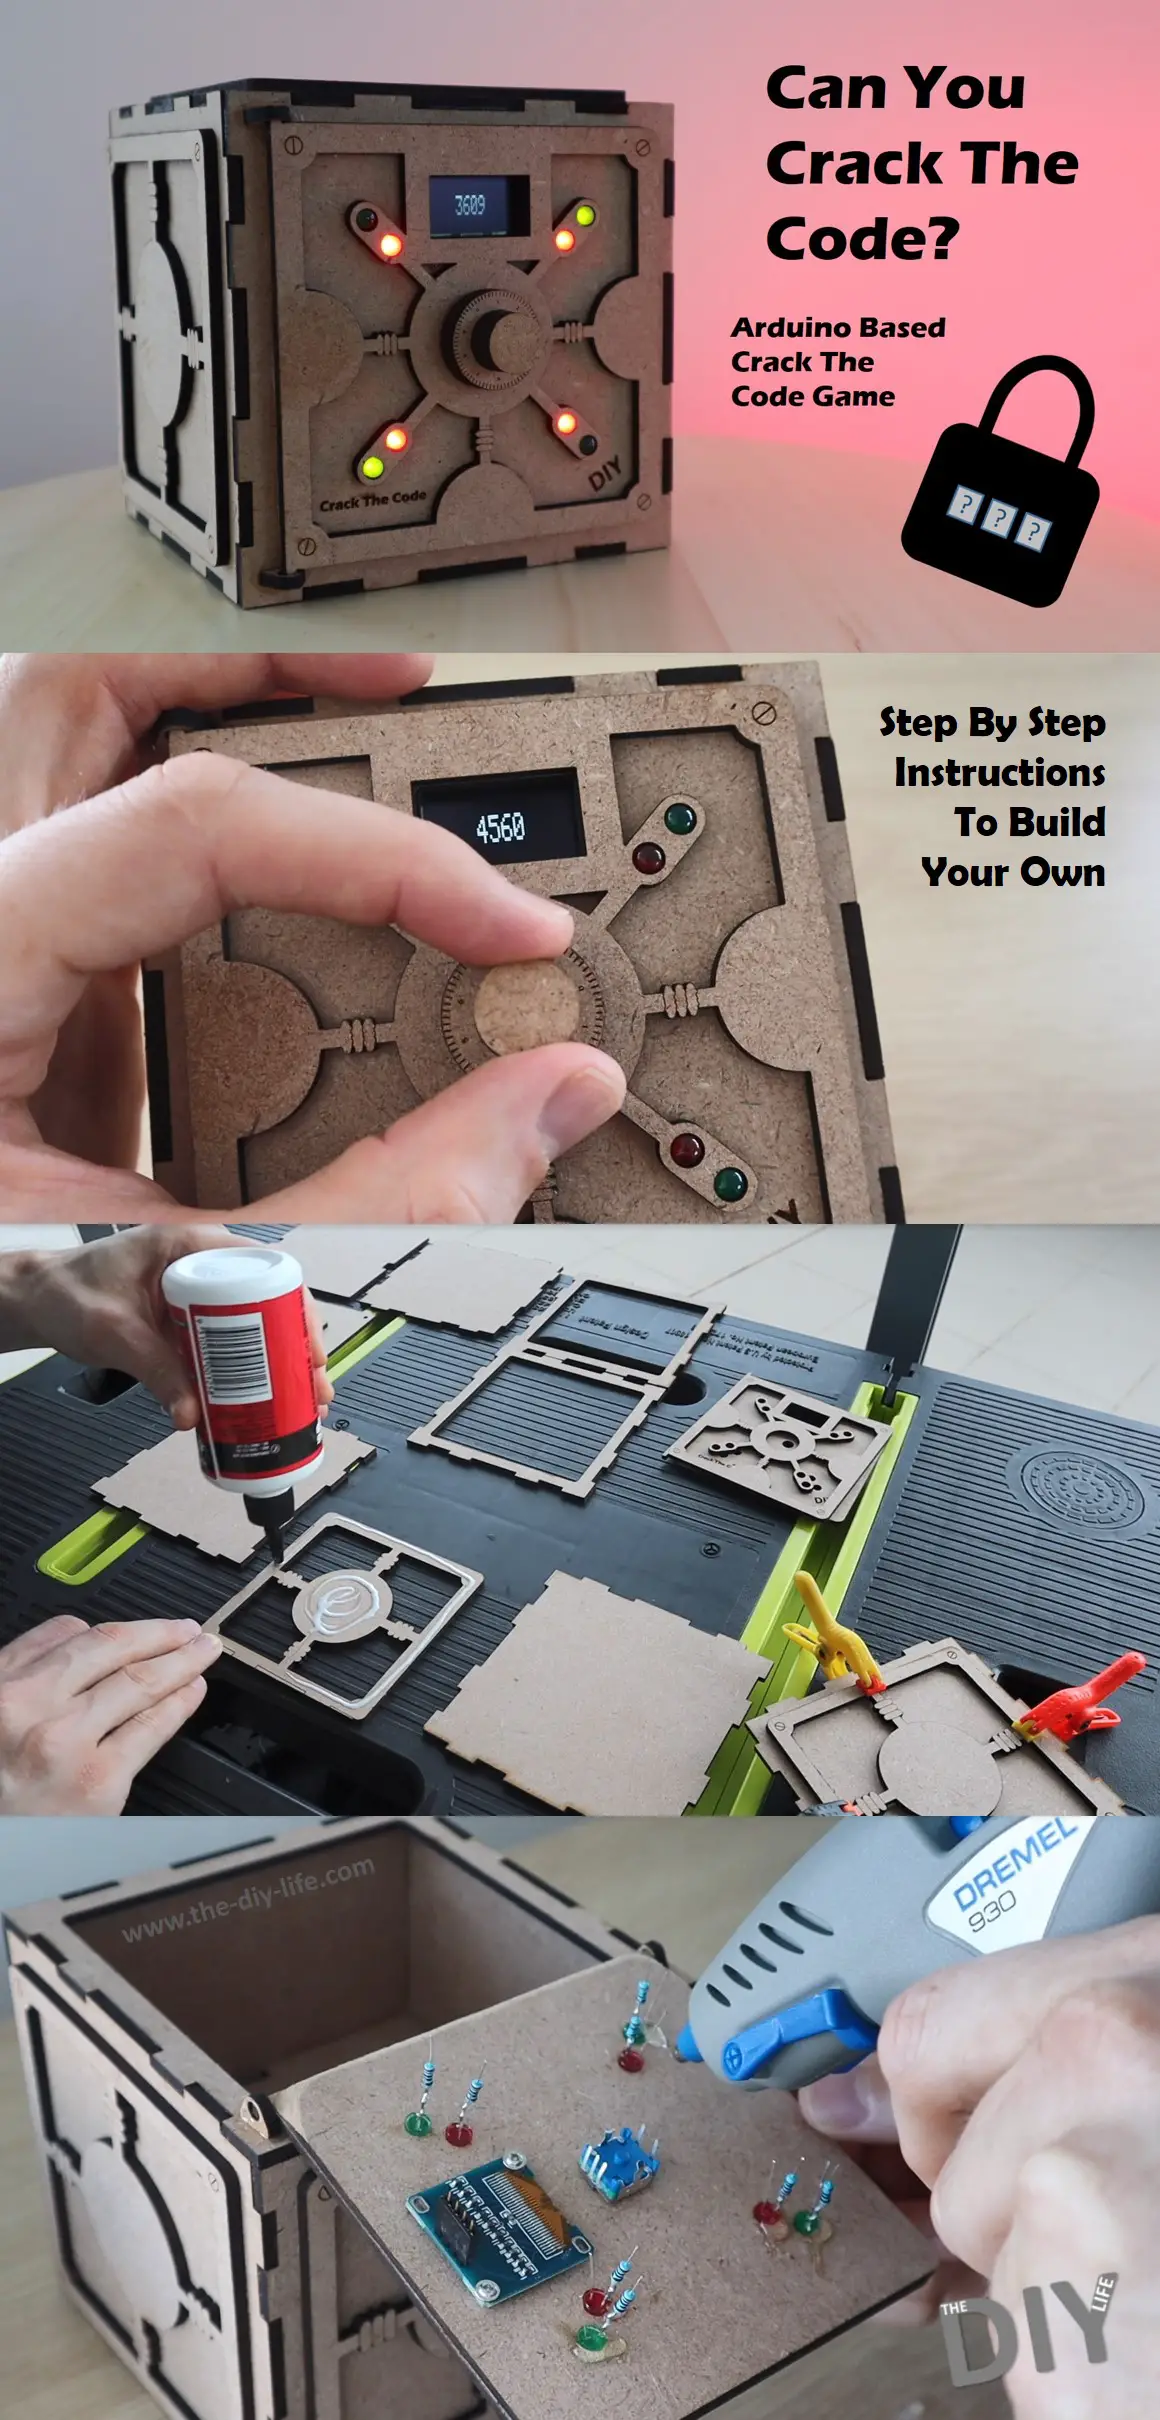 Crack The Code Game, Built Into A DIY Safe Puzzle Box | The DIY Life